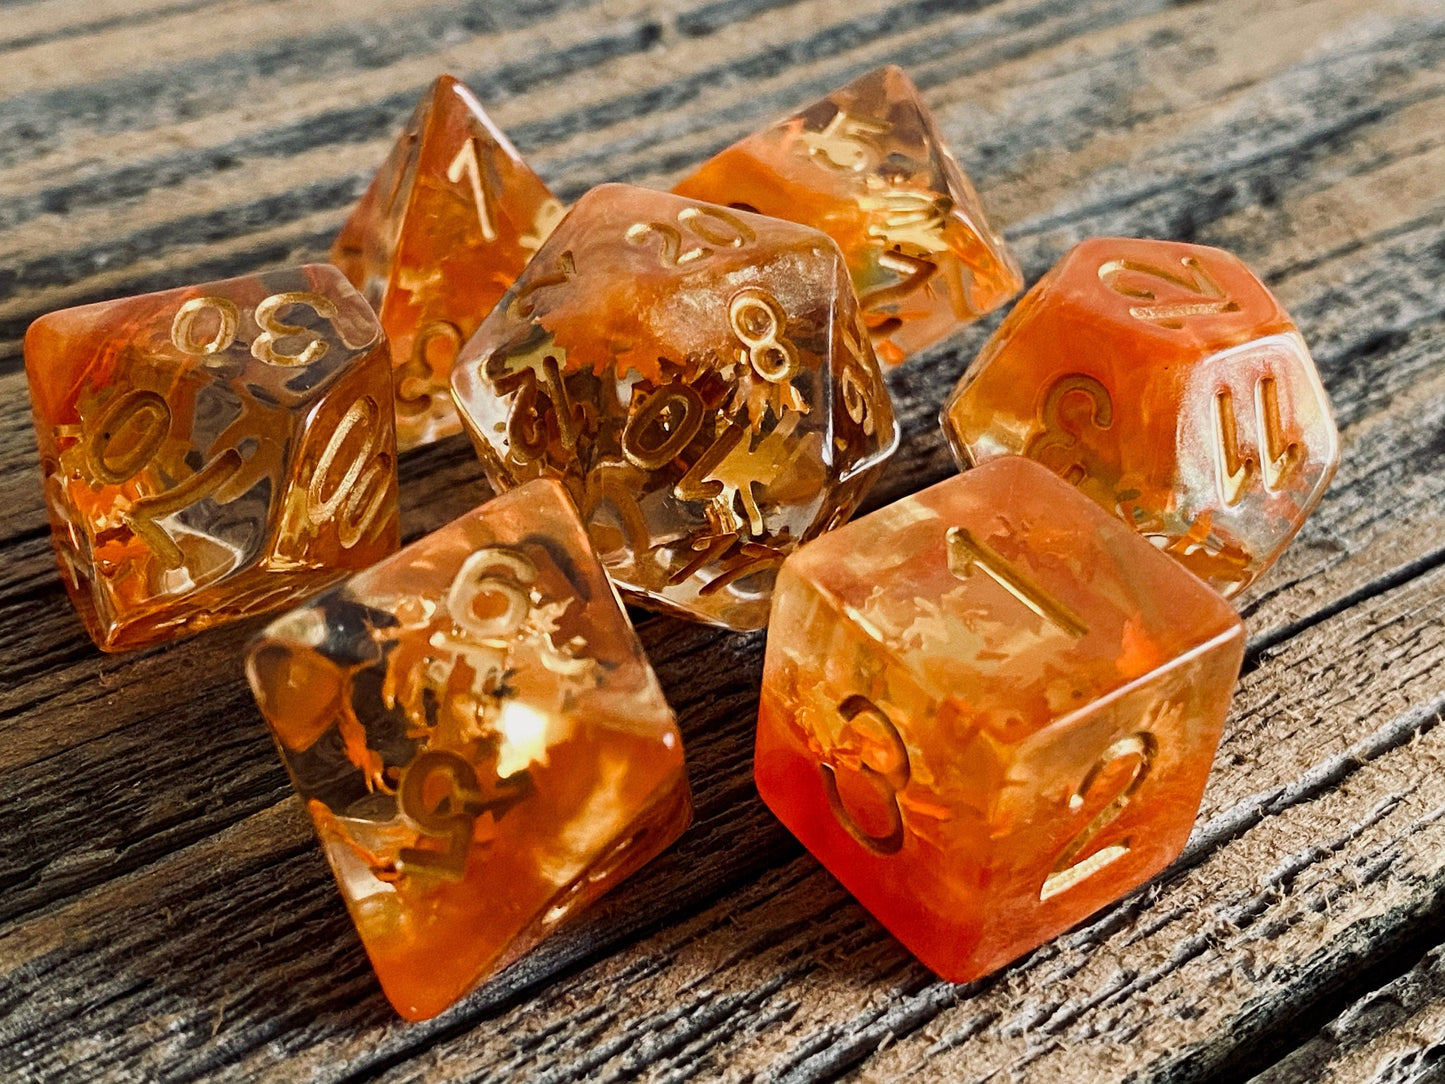 The Crooked Tavern Dice Sets Fall Leaves RPG Dice Set | Falling Leaves Inside!